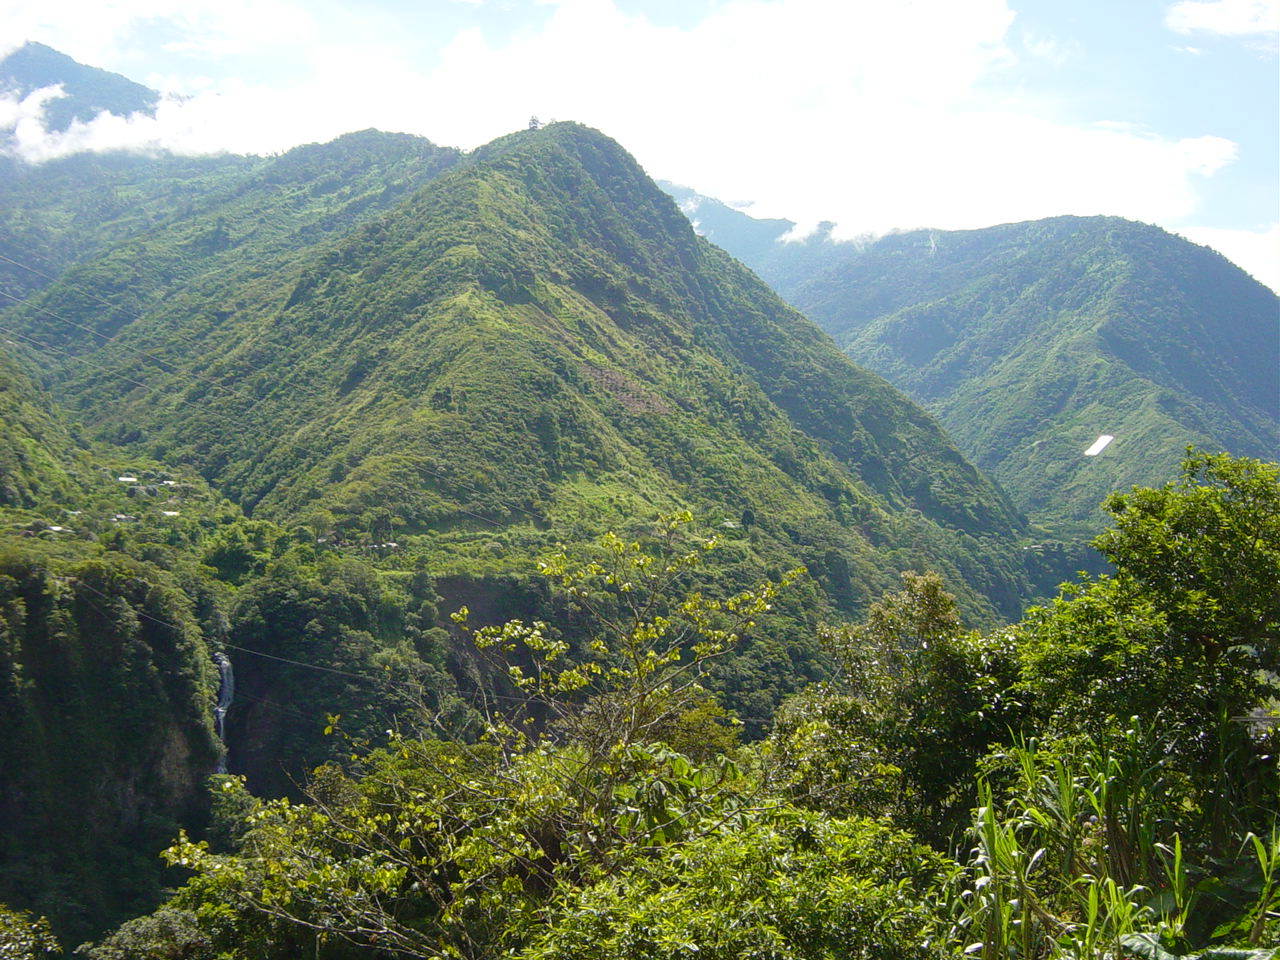 Lush green mountains with dense vegetation, a small waterfall in the distance, and a clear blue sky above.